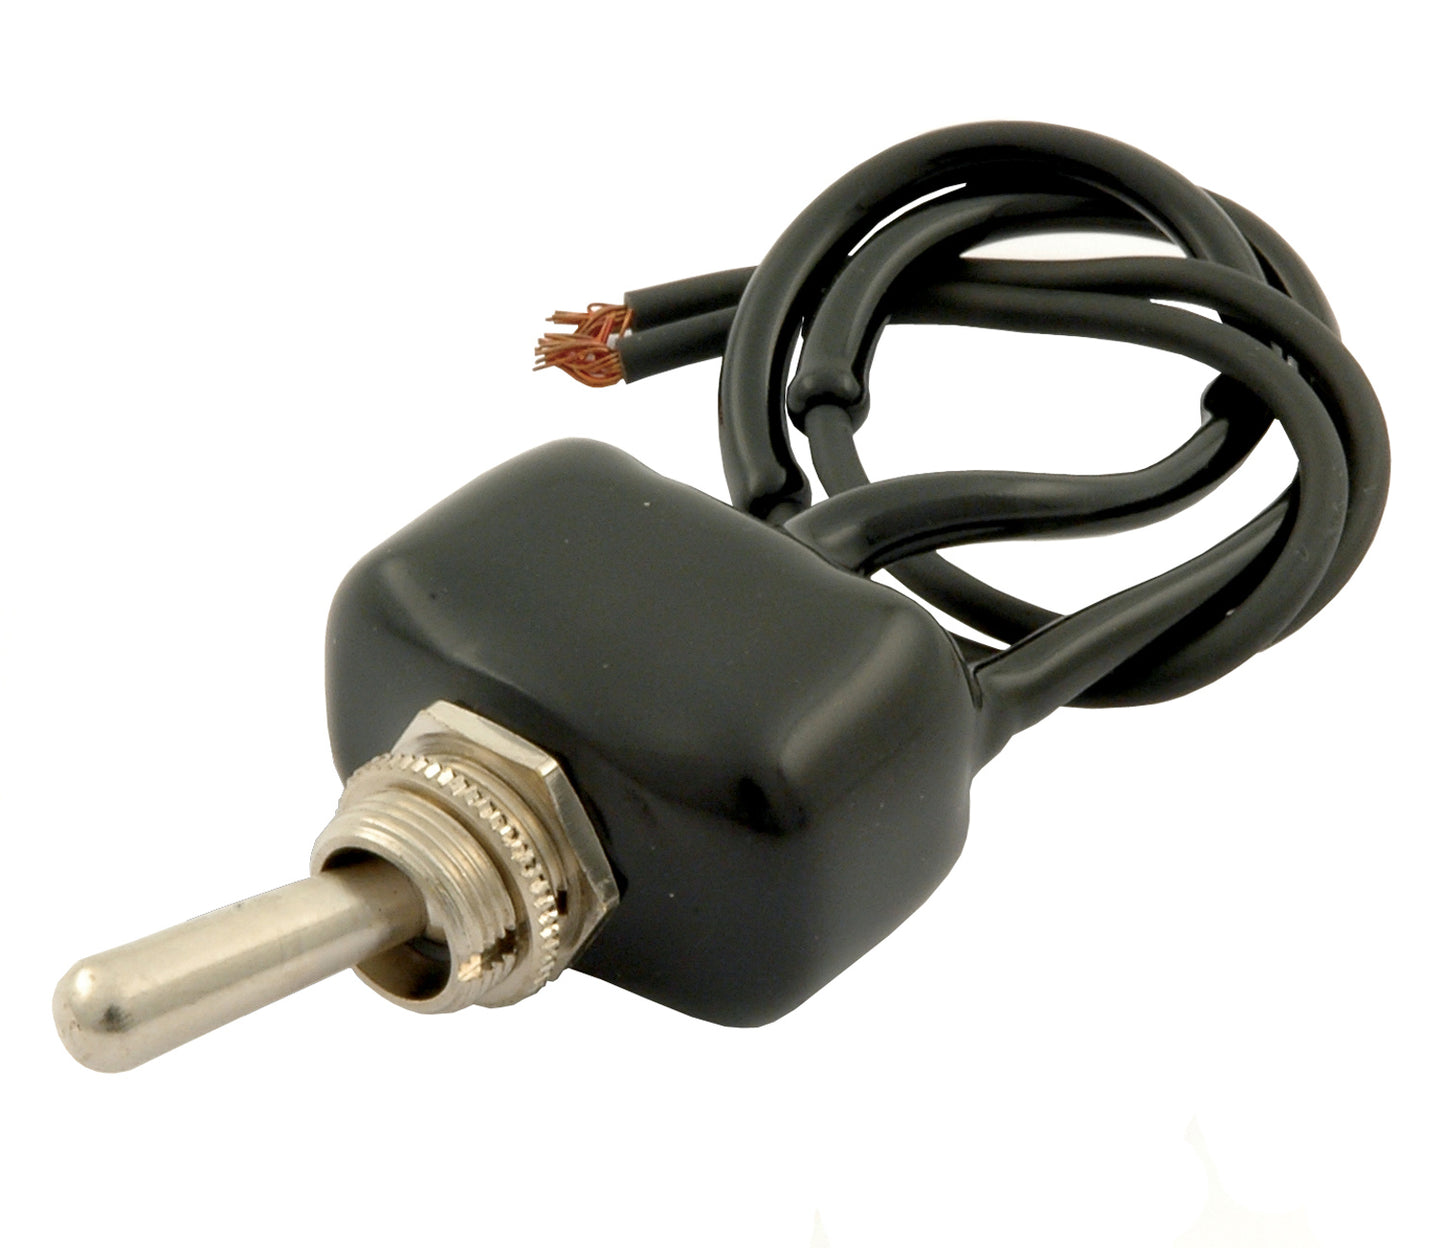 Taylor Cable 1026 Toggle Switch on/off waterproof